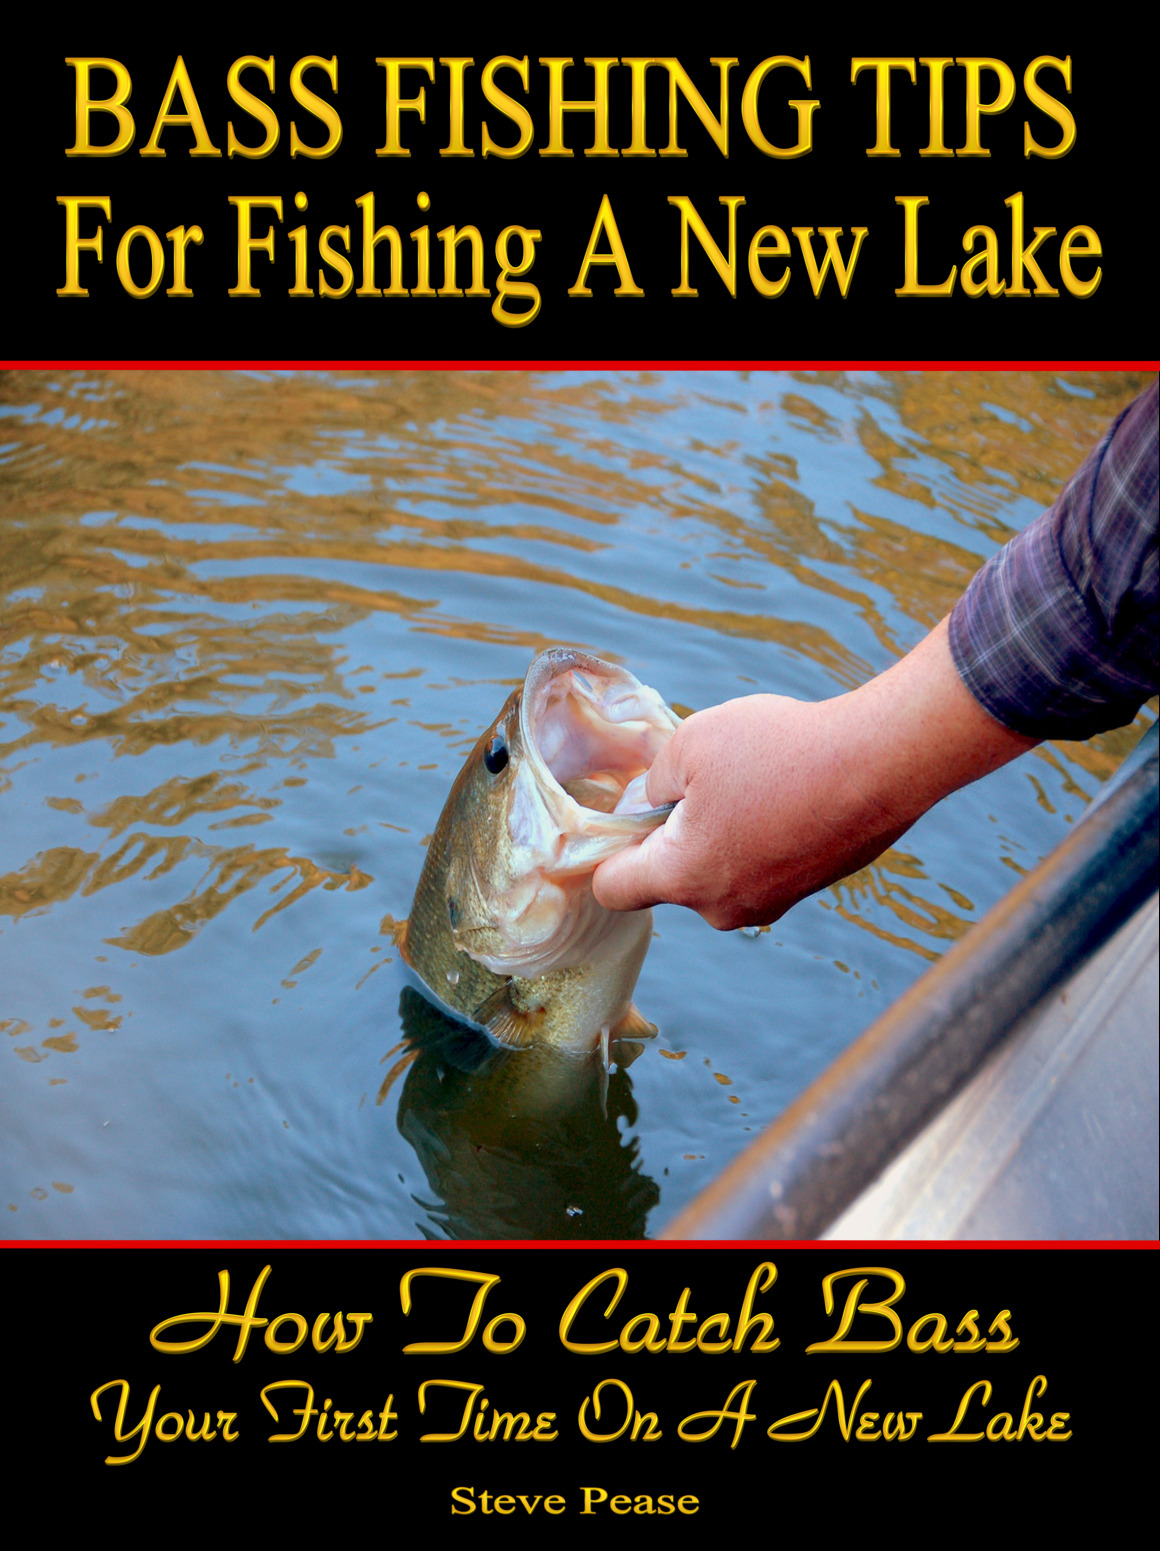 HOW TO FISH A NEW LAKE